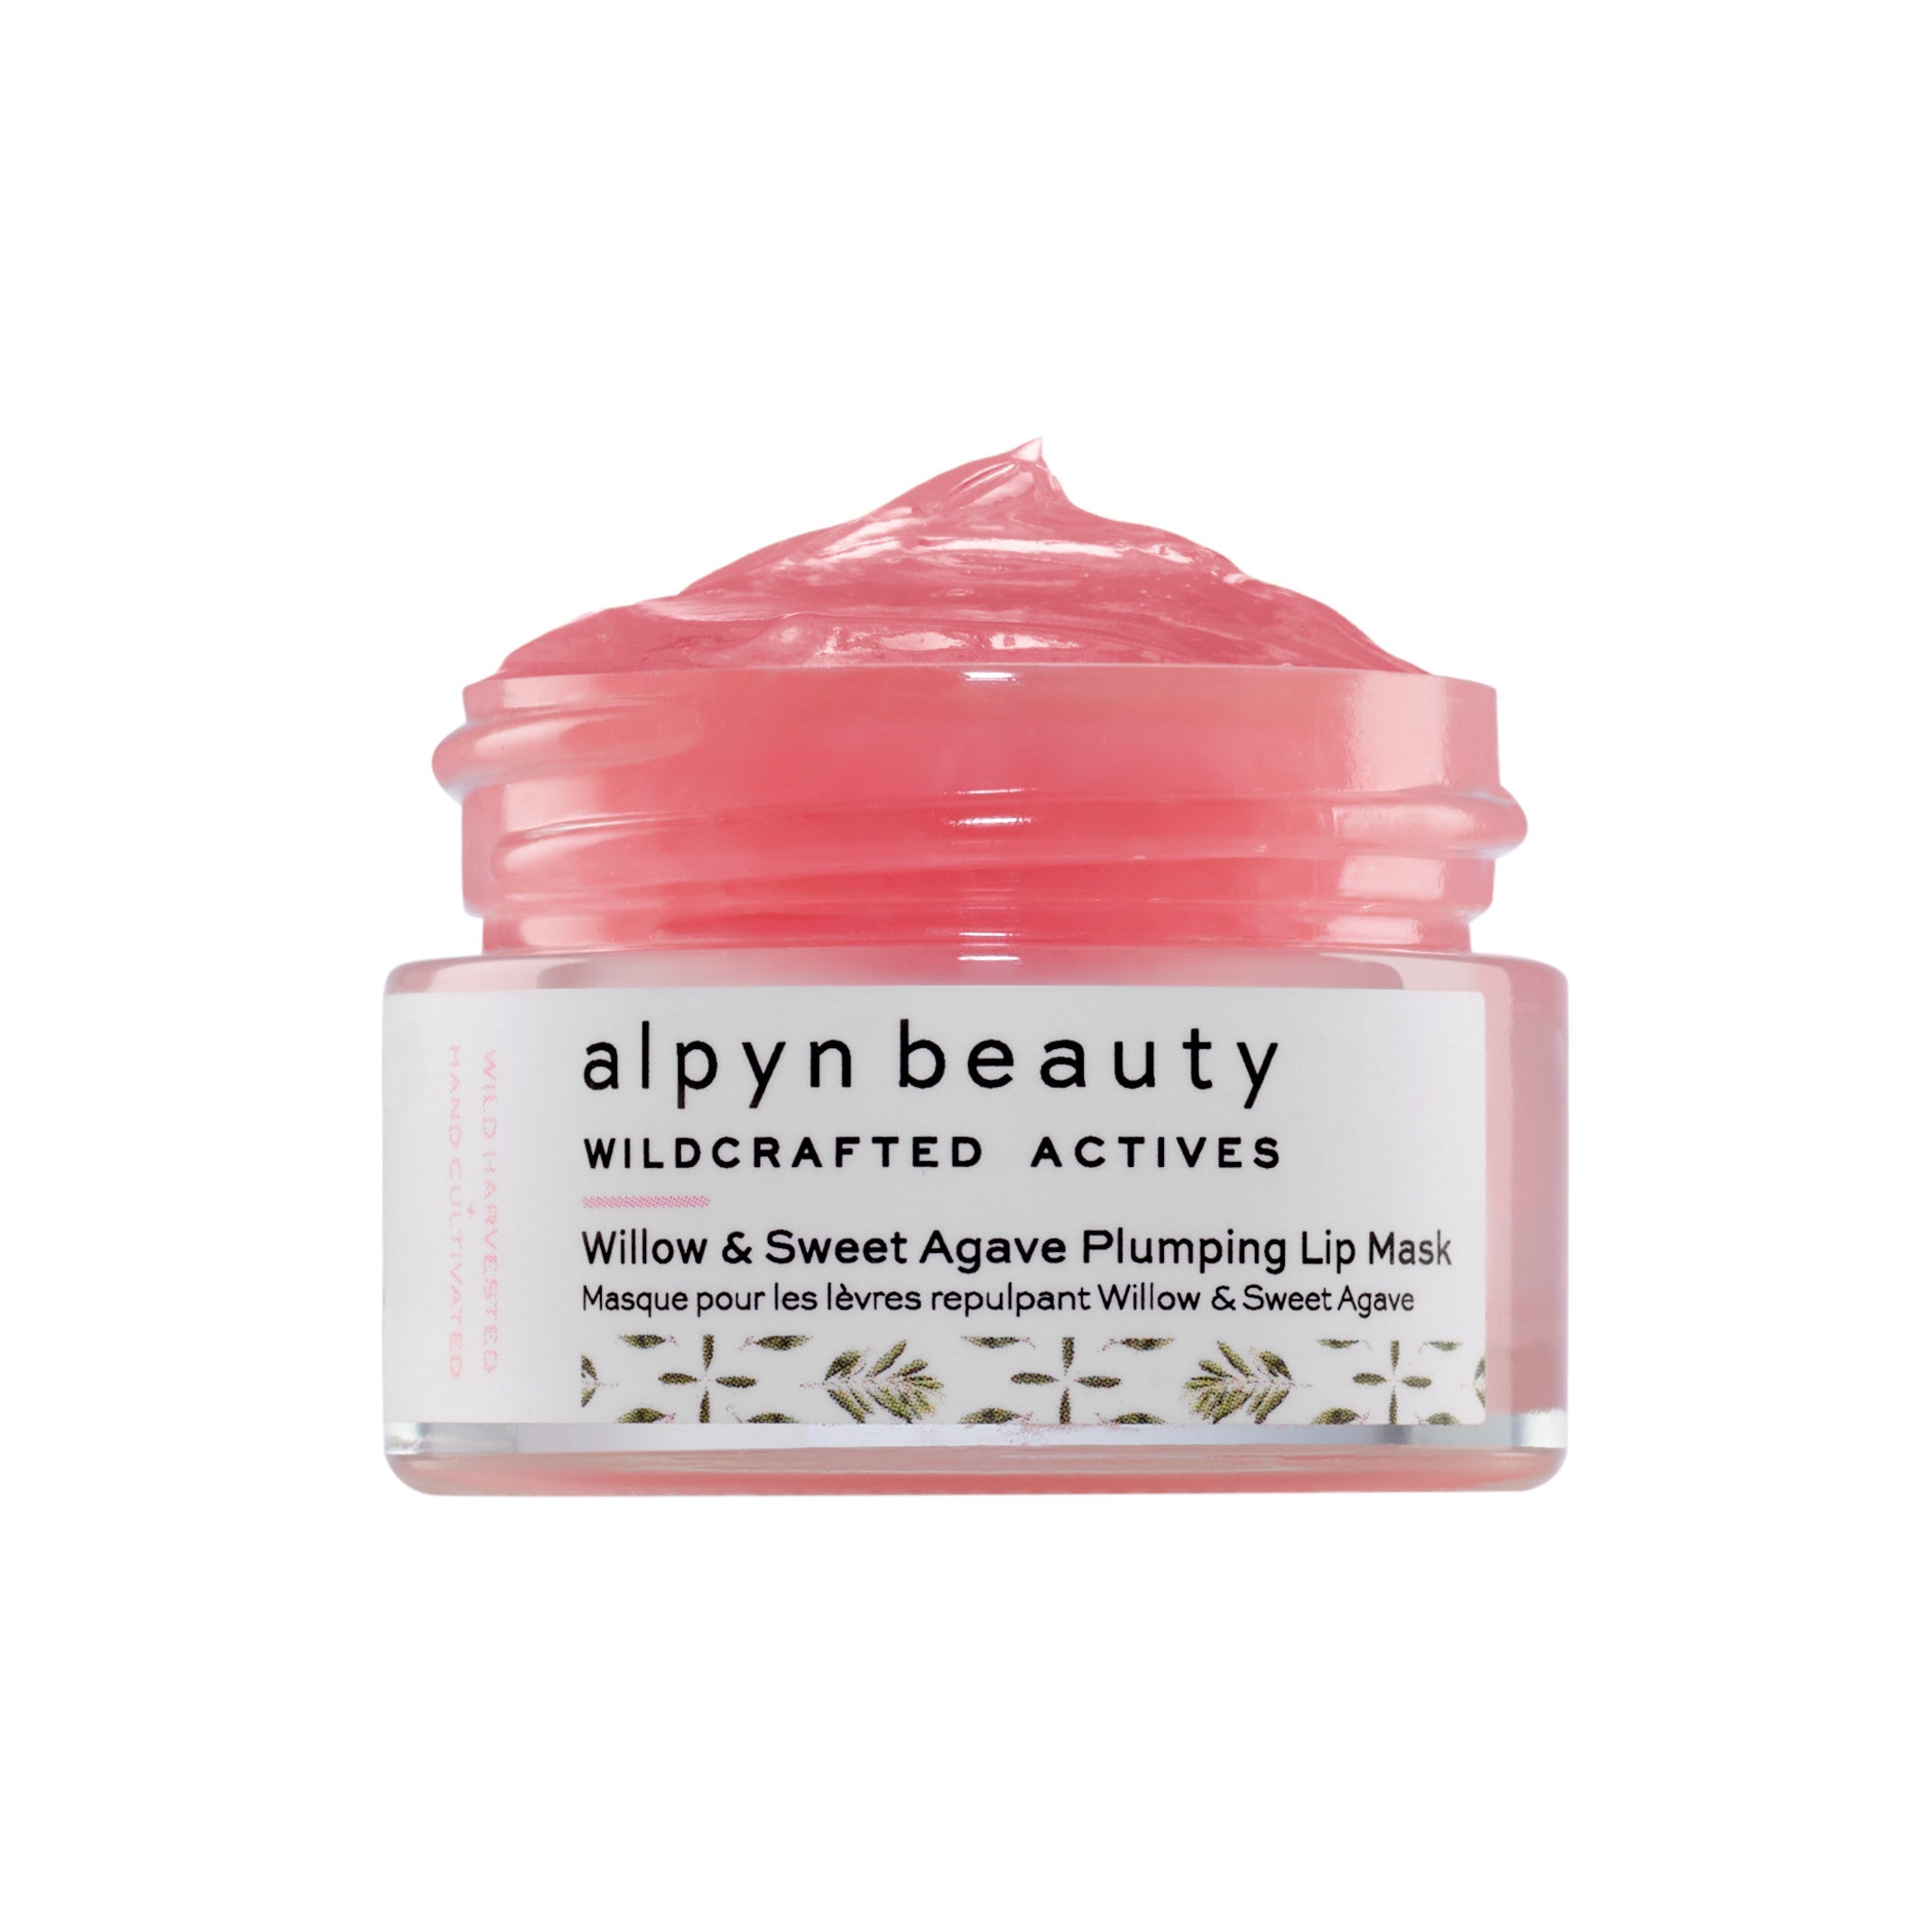 Alpyn Beauty Willow and Sweet Agave Plumping Lip Mask main image.